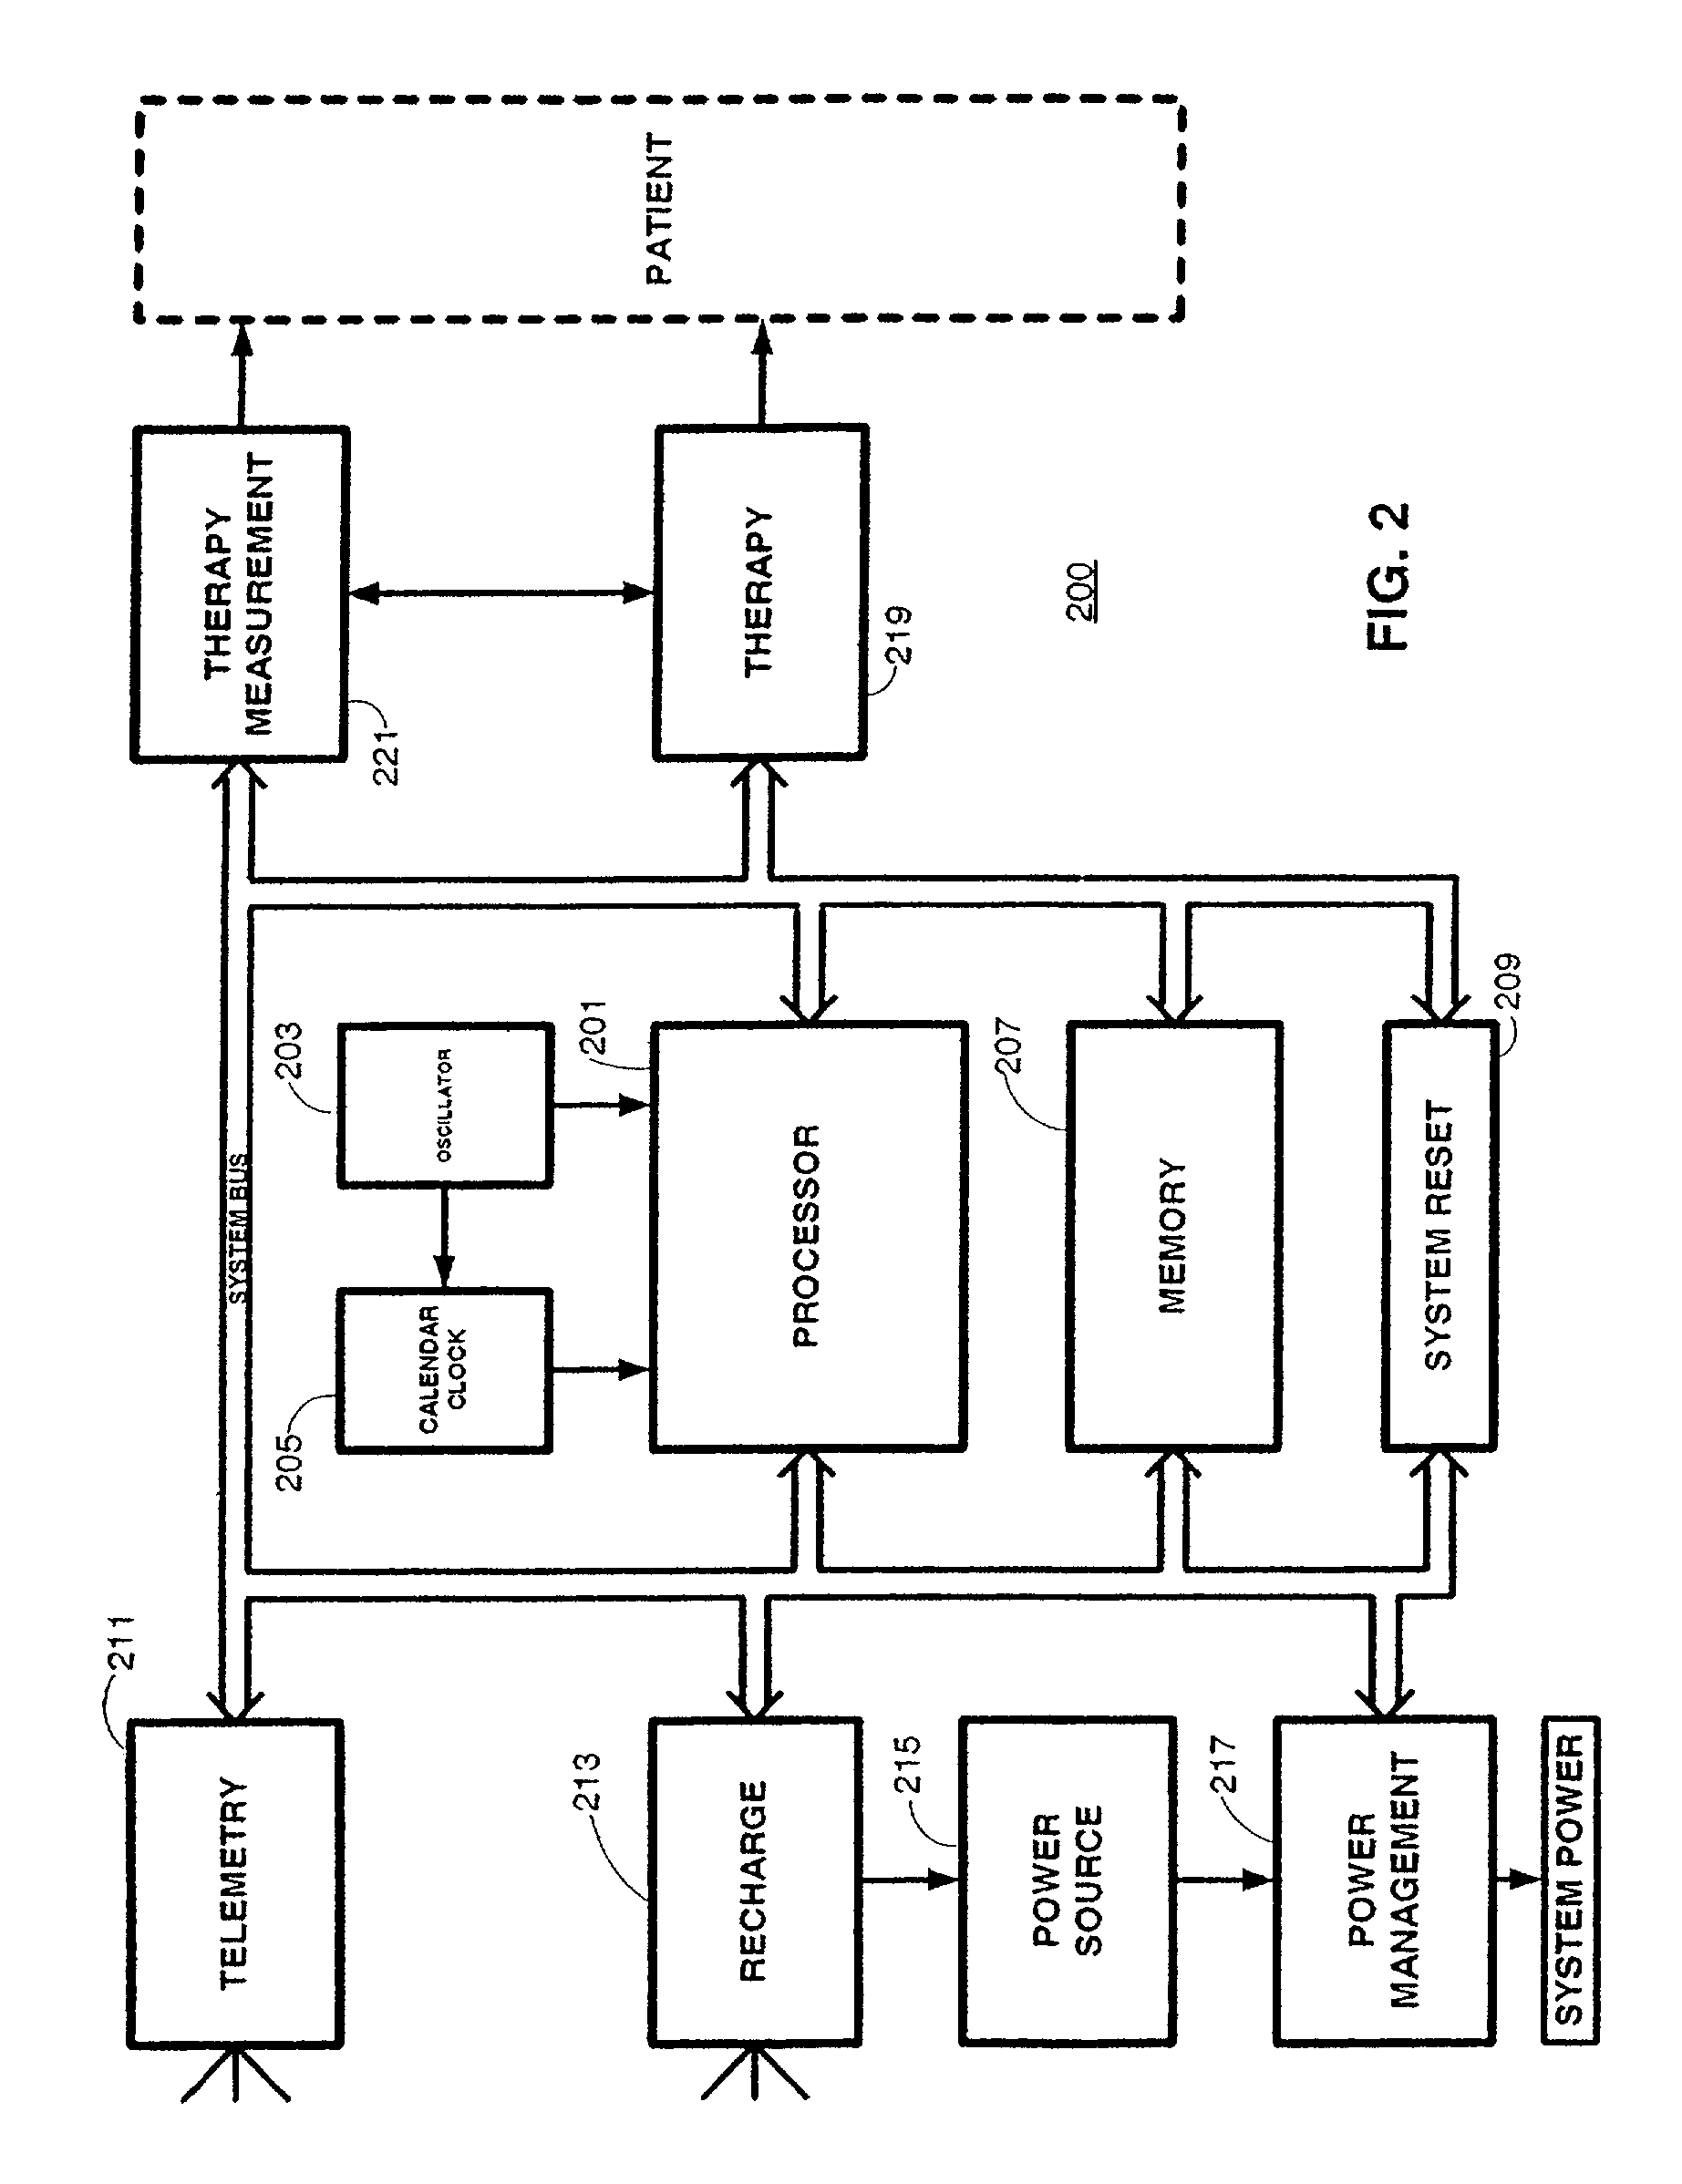 Automatic waveform output adjustment for an implantable medical device